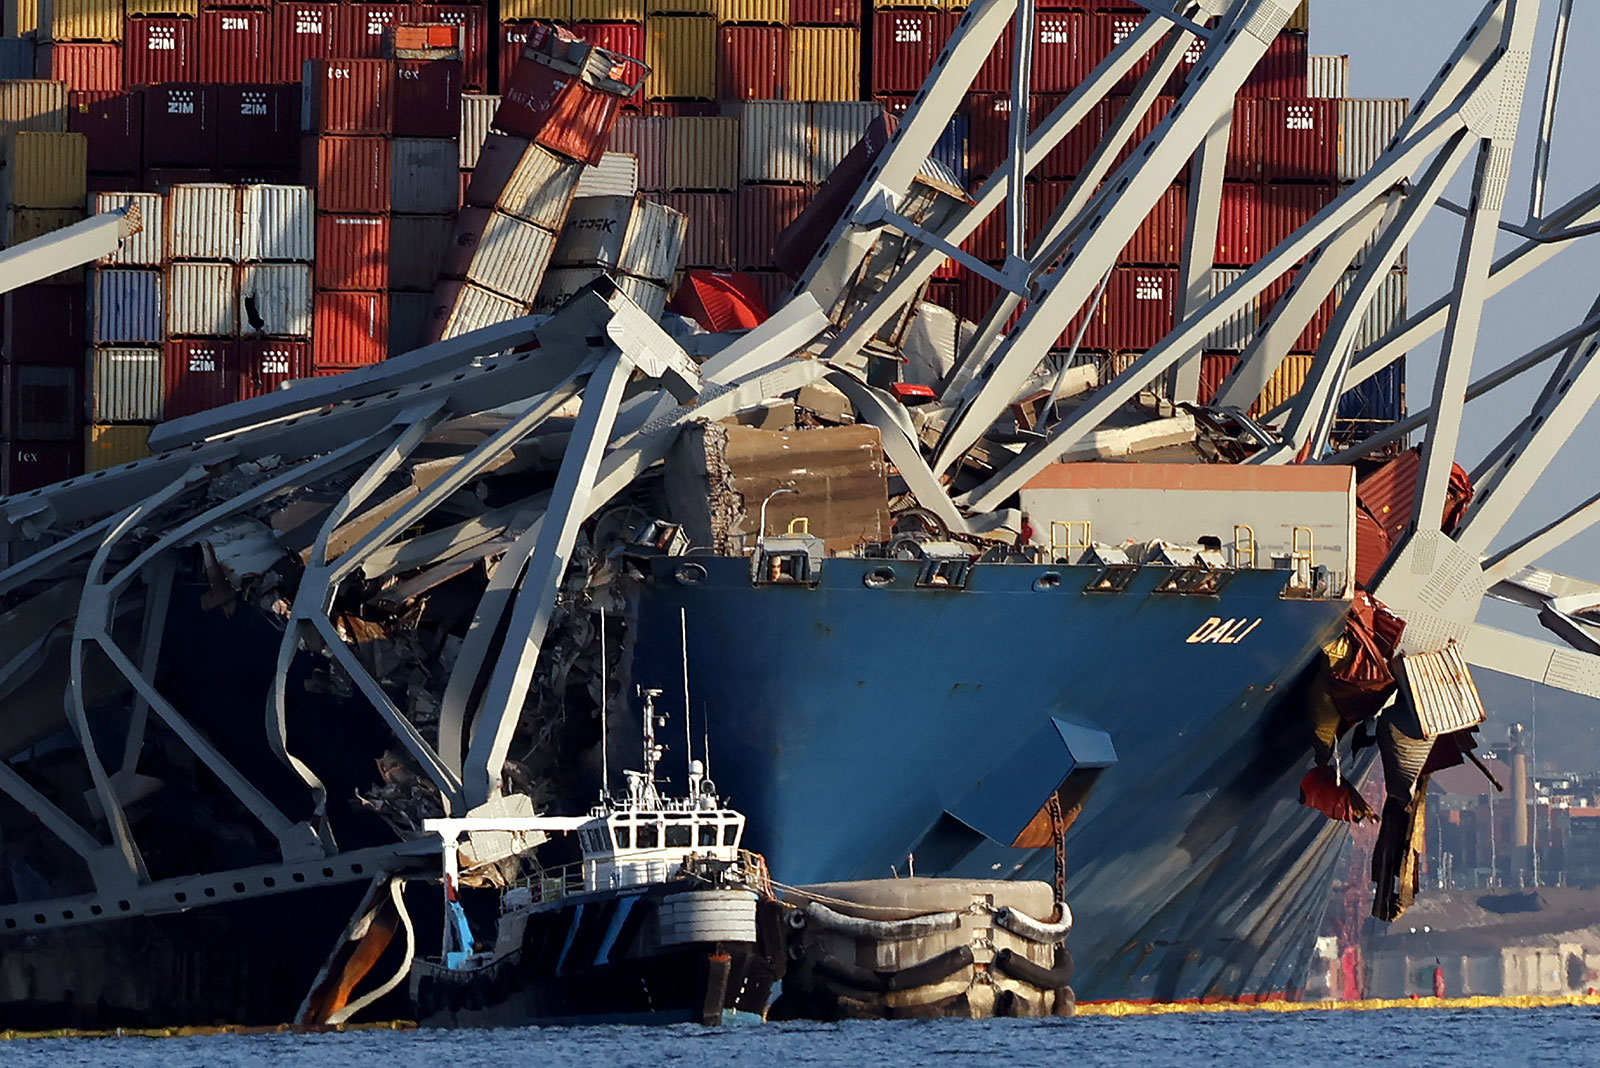 Crushed shipping containers are seen on the bow of the Dali on Friday in Baltimore. 